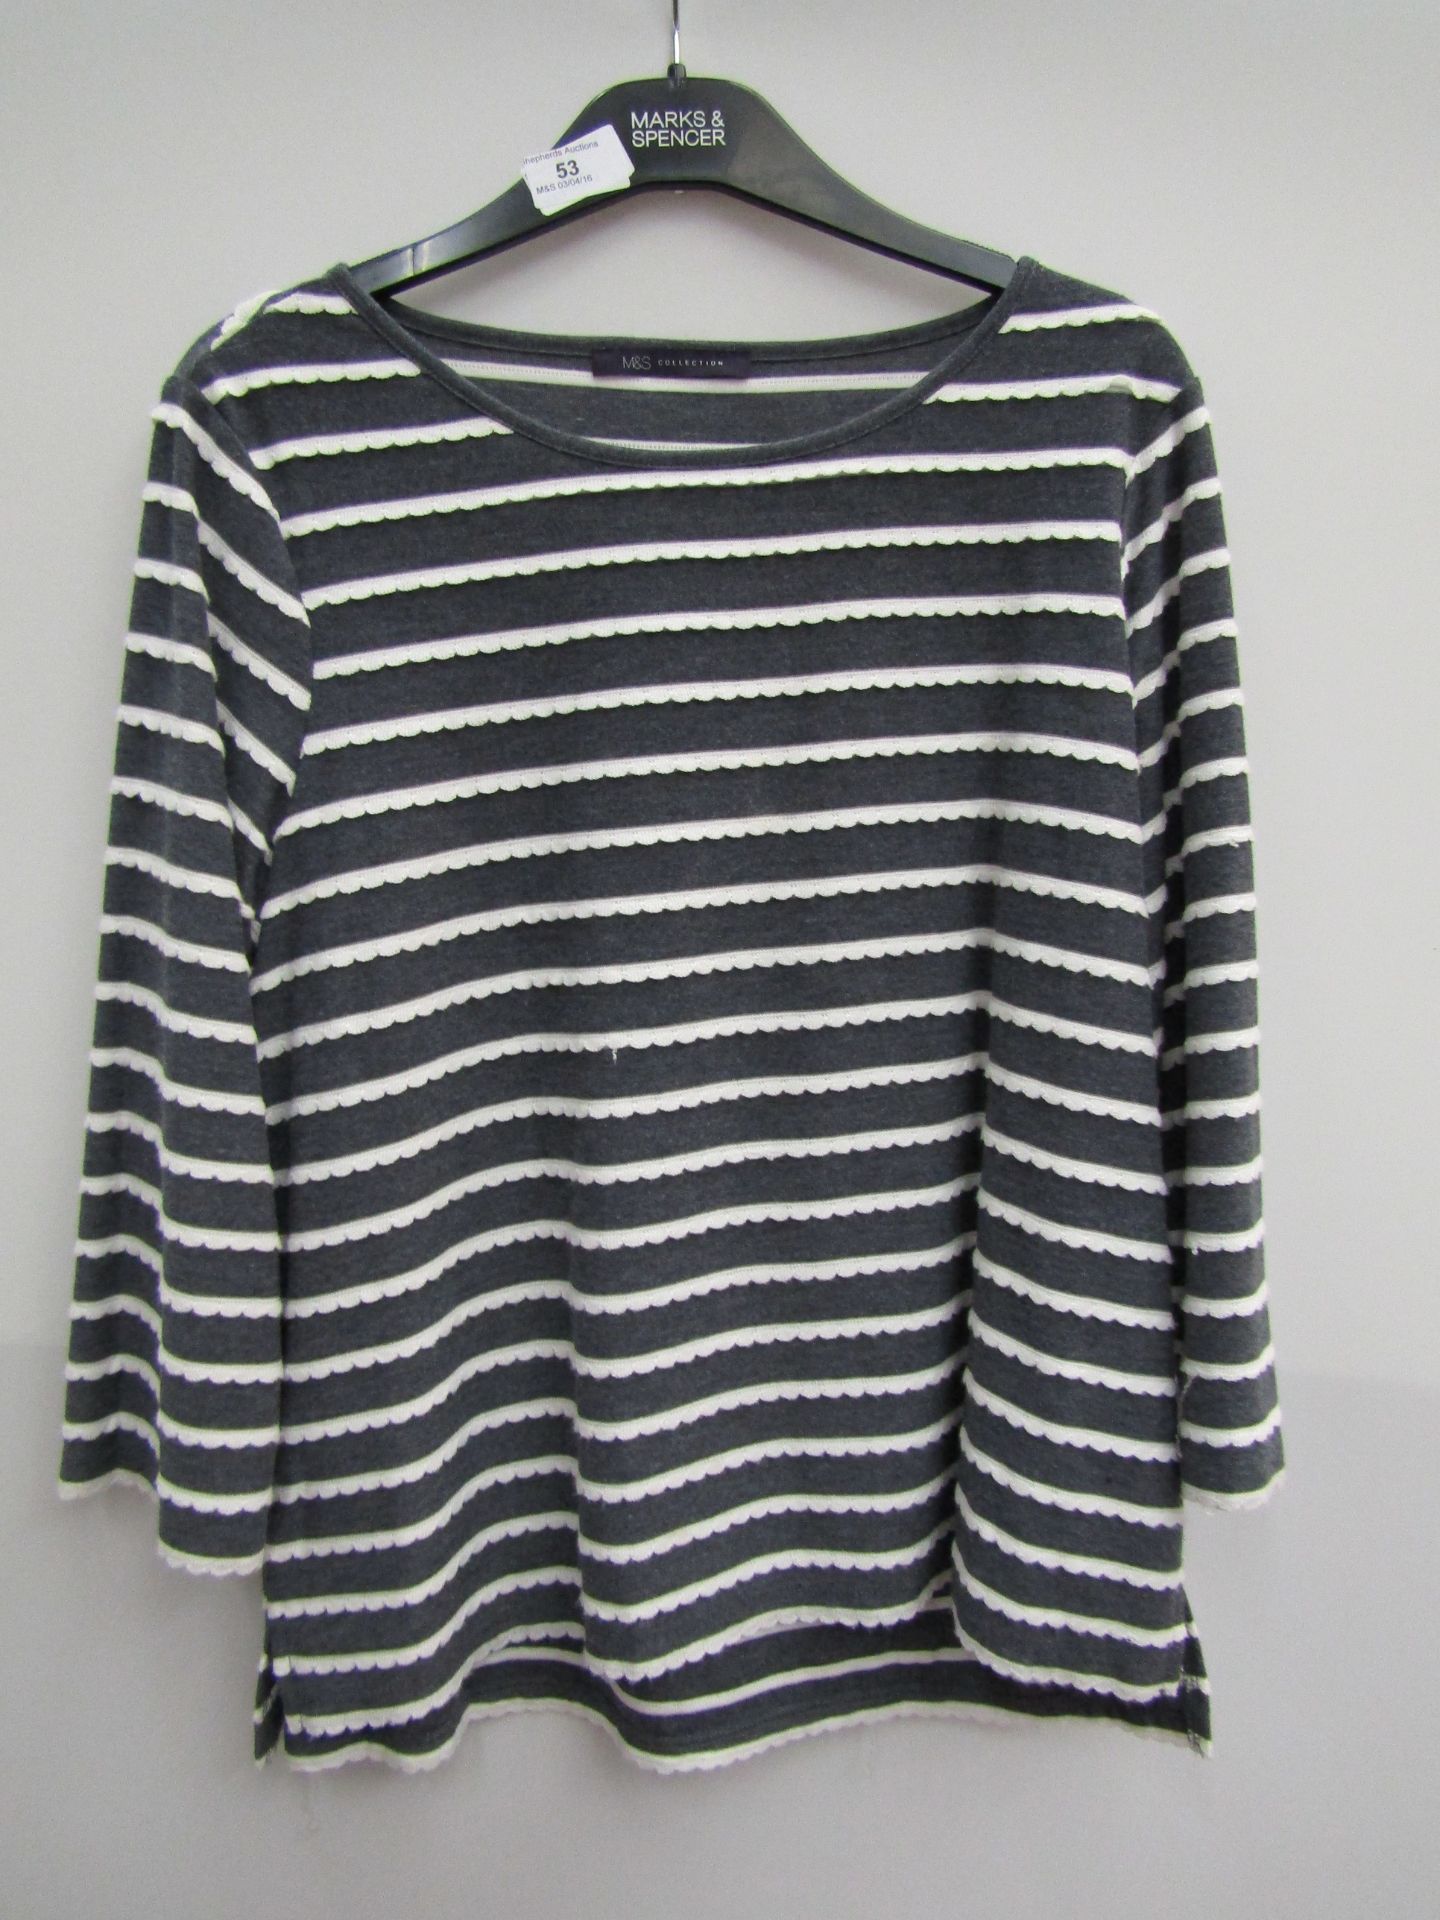 M&S Collection 3/4 Sleeve Top Size 14. Please read lot zero prior to bidding.